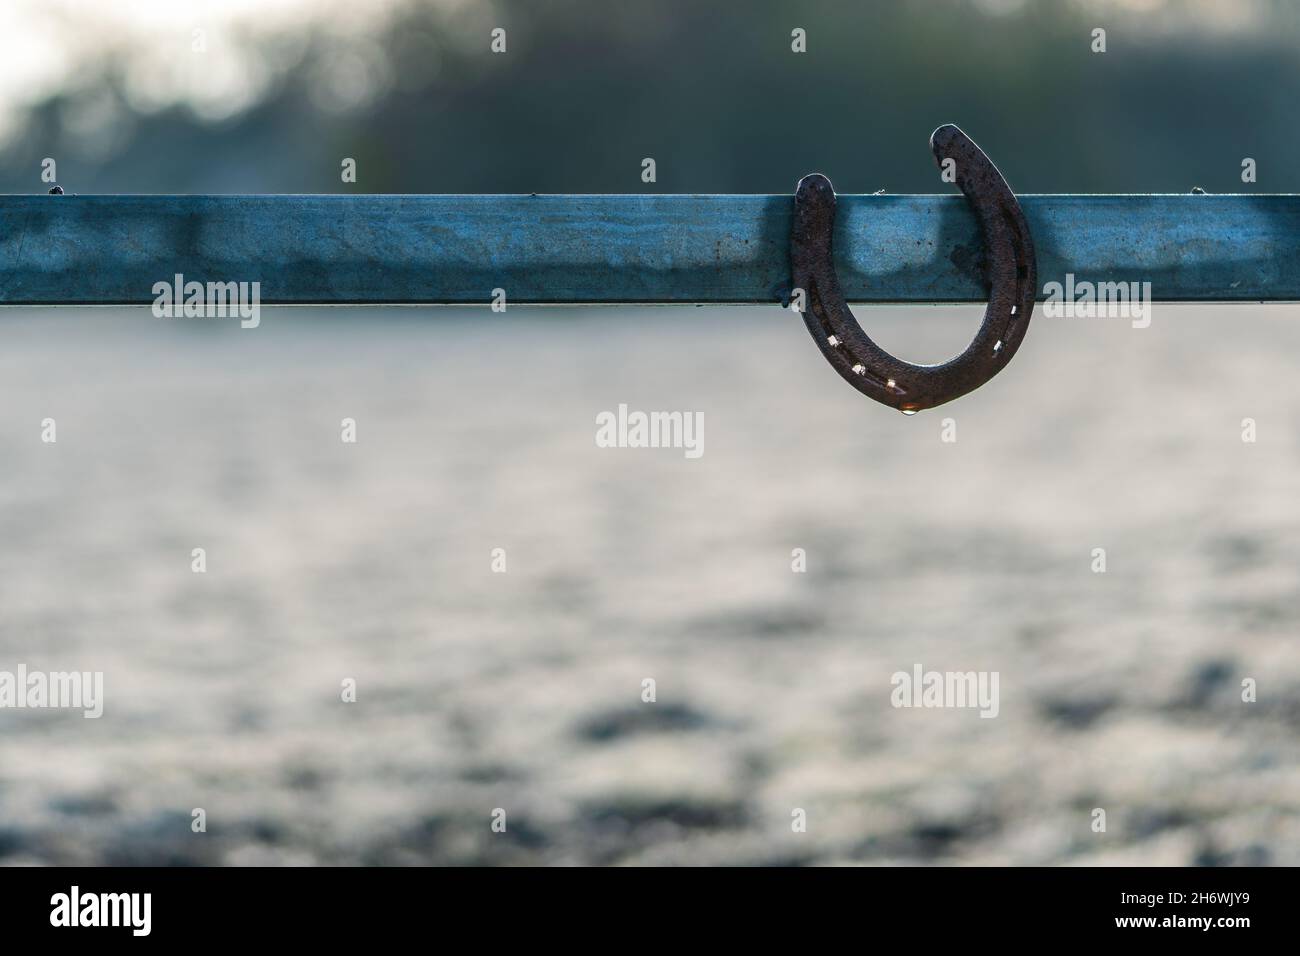 One rusty horseshoe hanging on a metal pasture gate on sunny winter morning. Symbol of good luck, lucky charm in equestrian sports and horse husbandry. Stock Photo